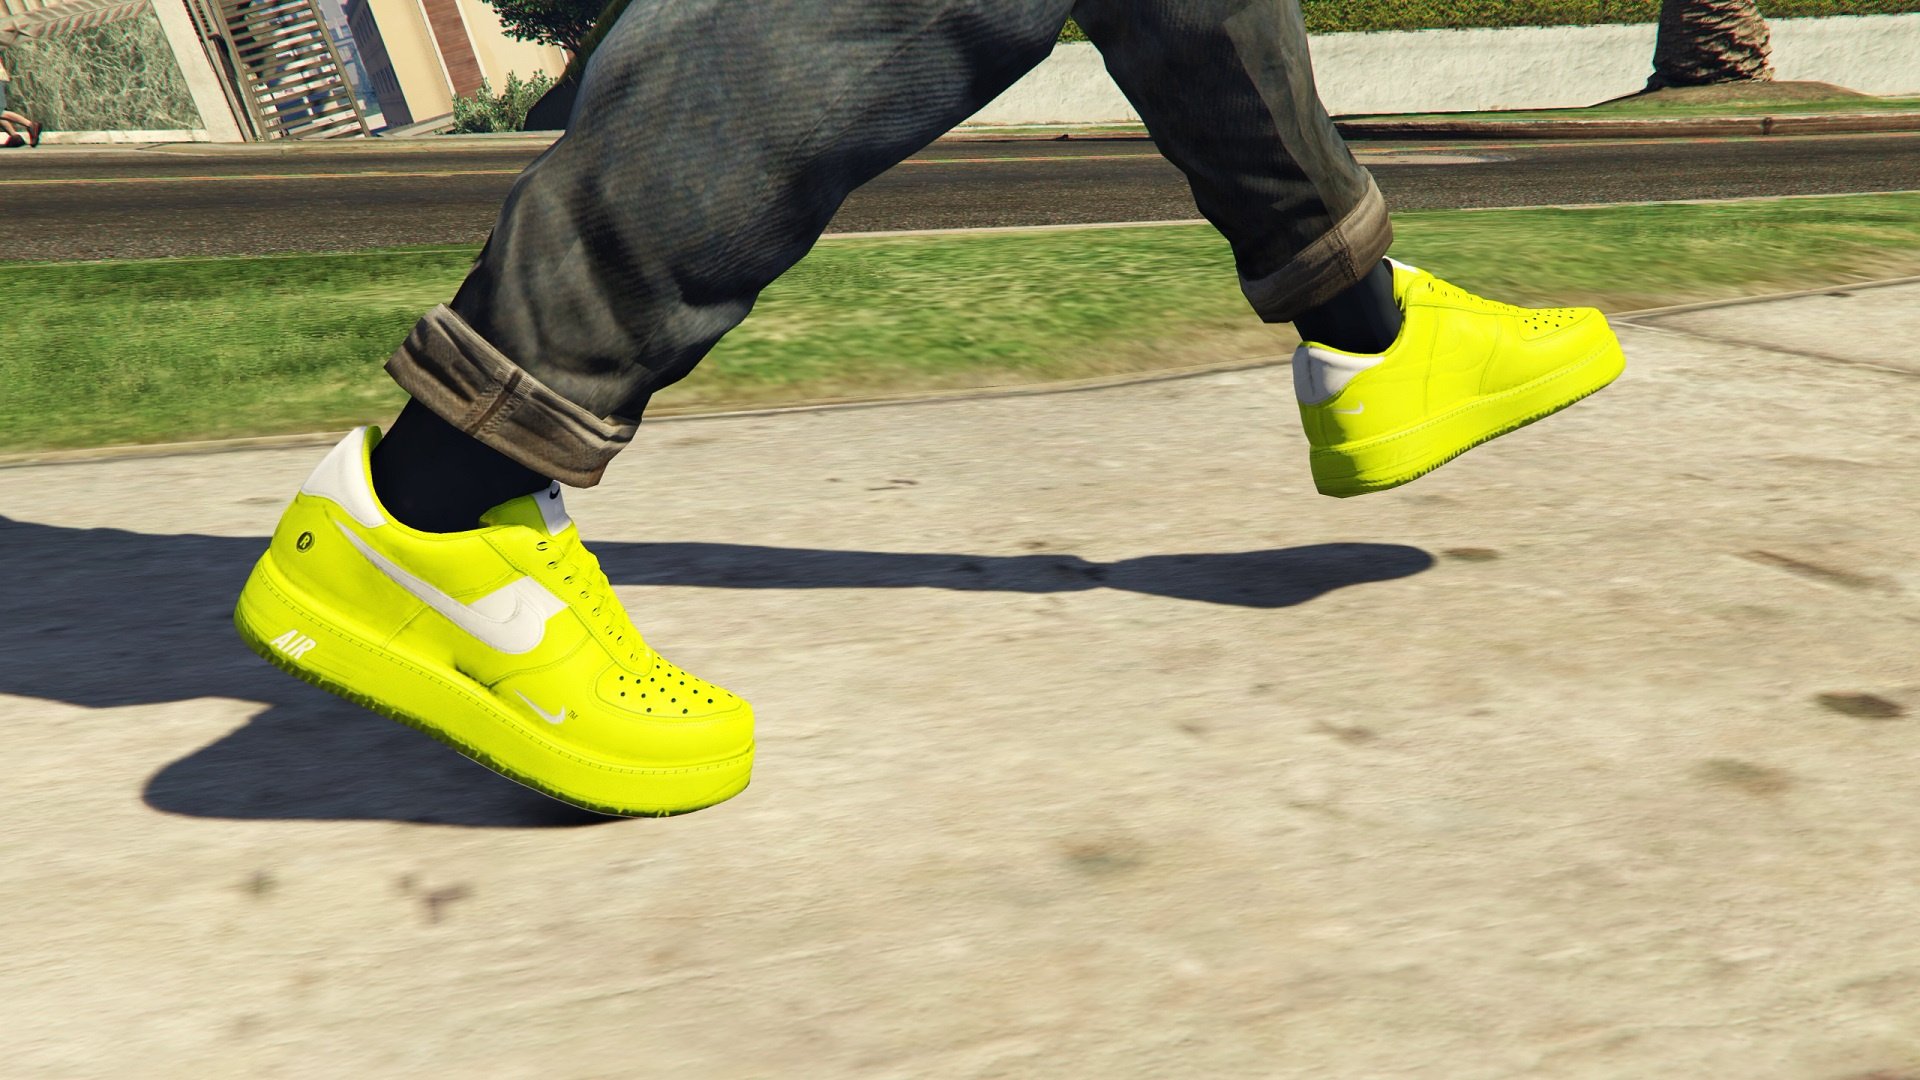 Look Out For The Nike Air Force 1 07 LV8 Utility Volt